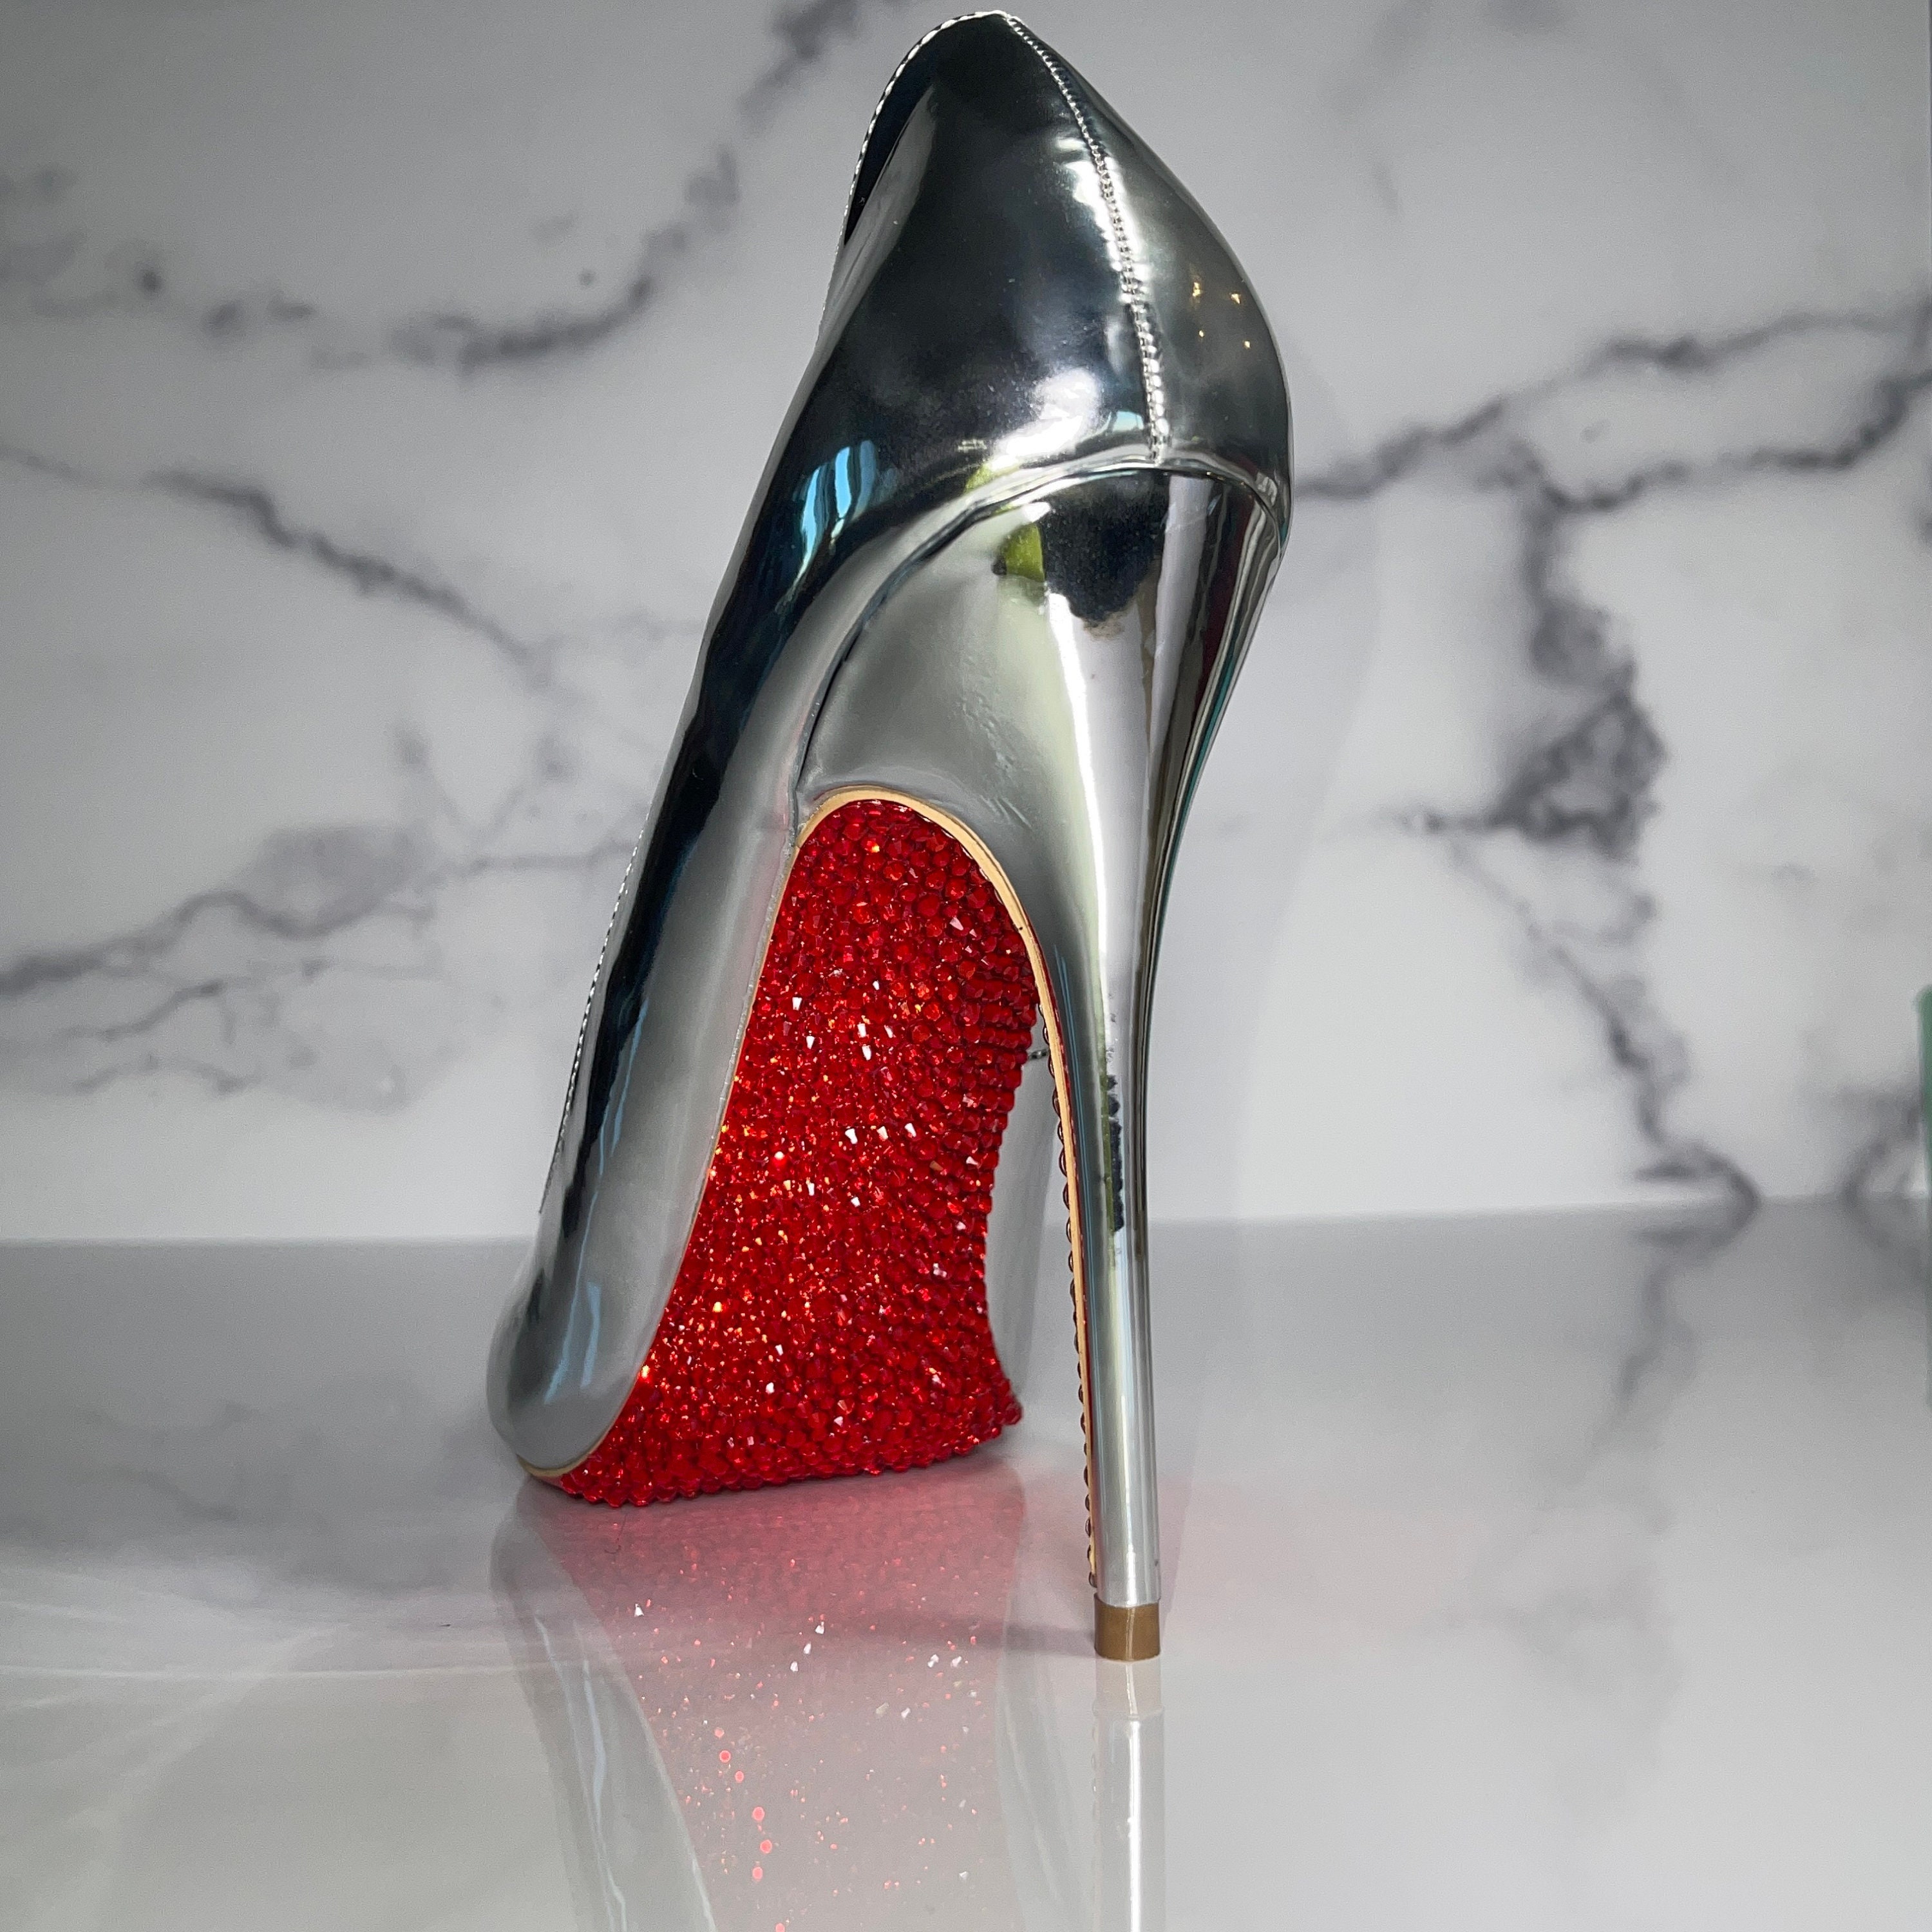 Christian Louboutin Red Alligator Shoes and Bag Gift Packaging 3D model